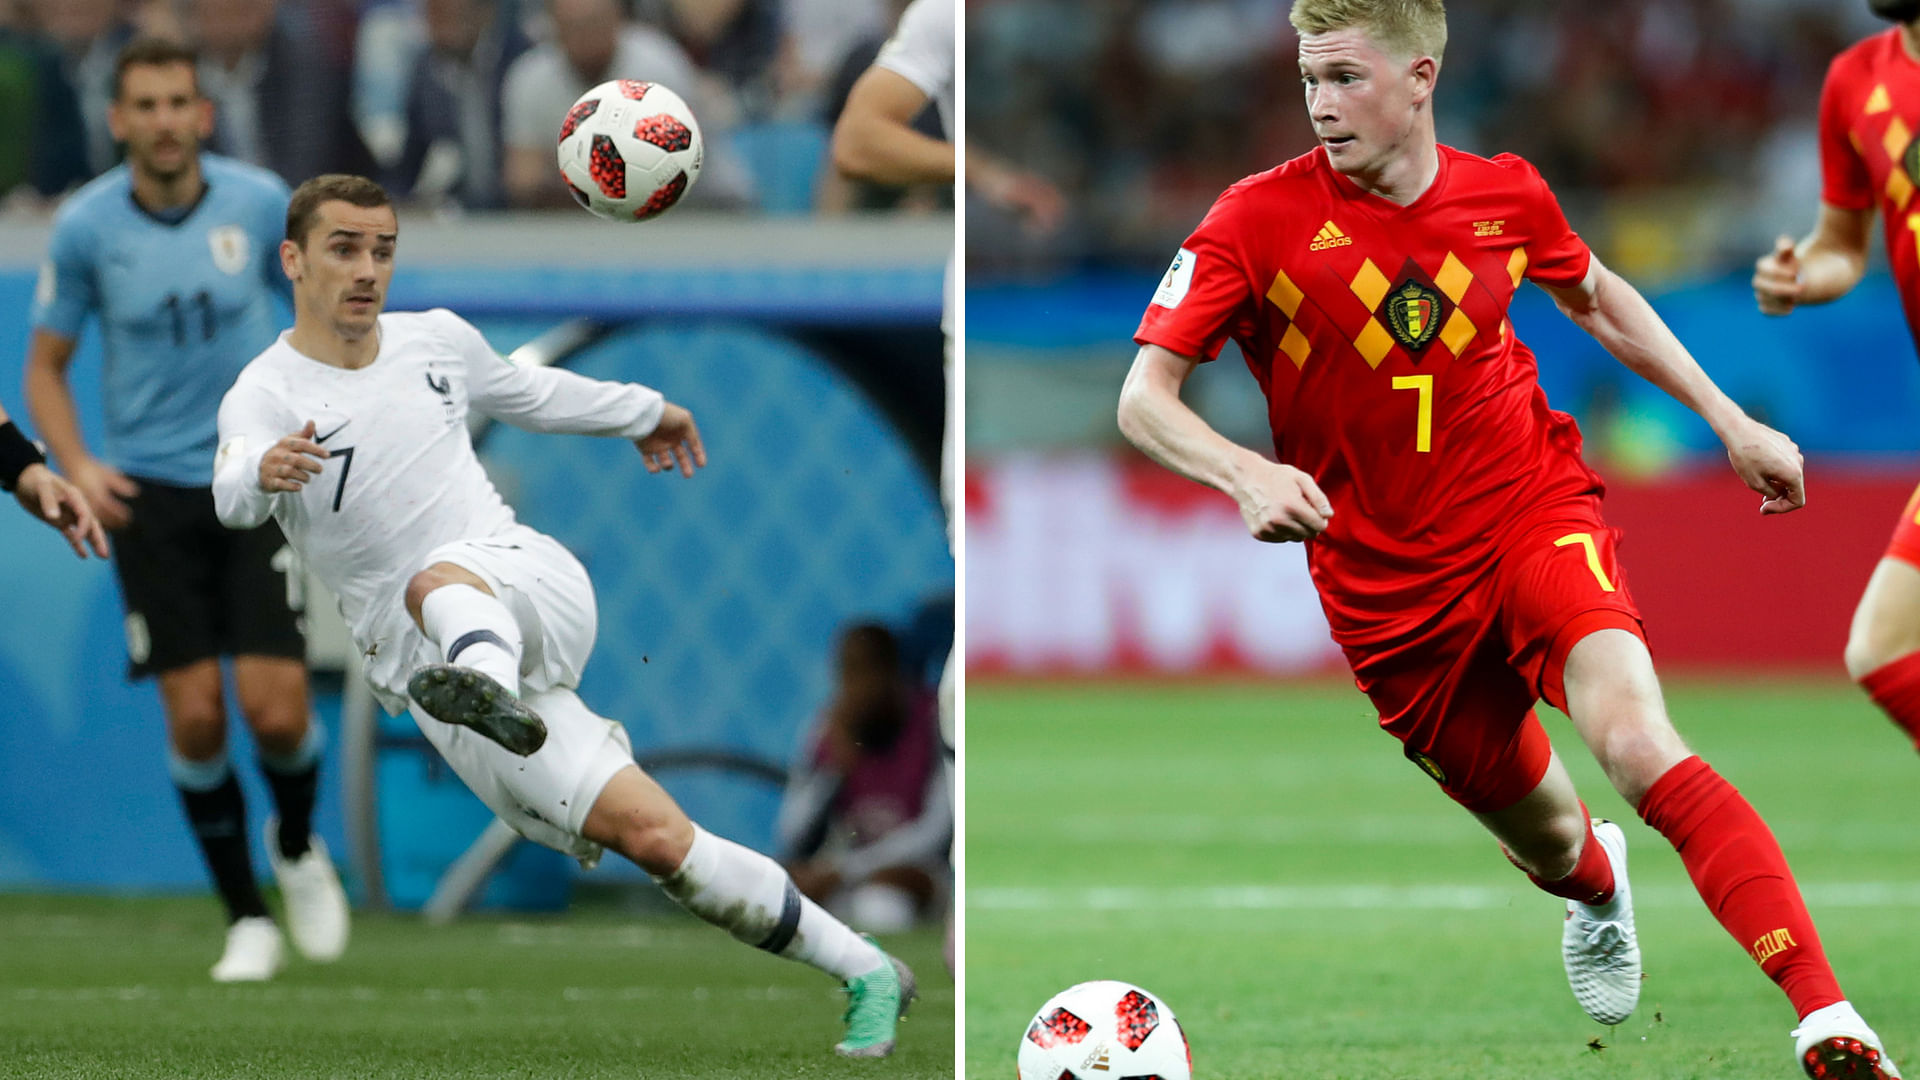 Both Griezmann (left) and de Bruyne led their teams to wins and bagged the Man of the Match award in the quarter-finals.